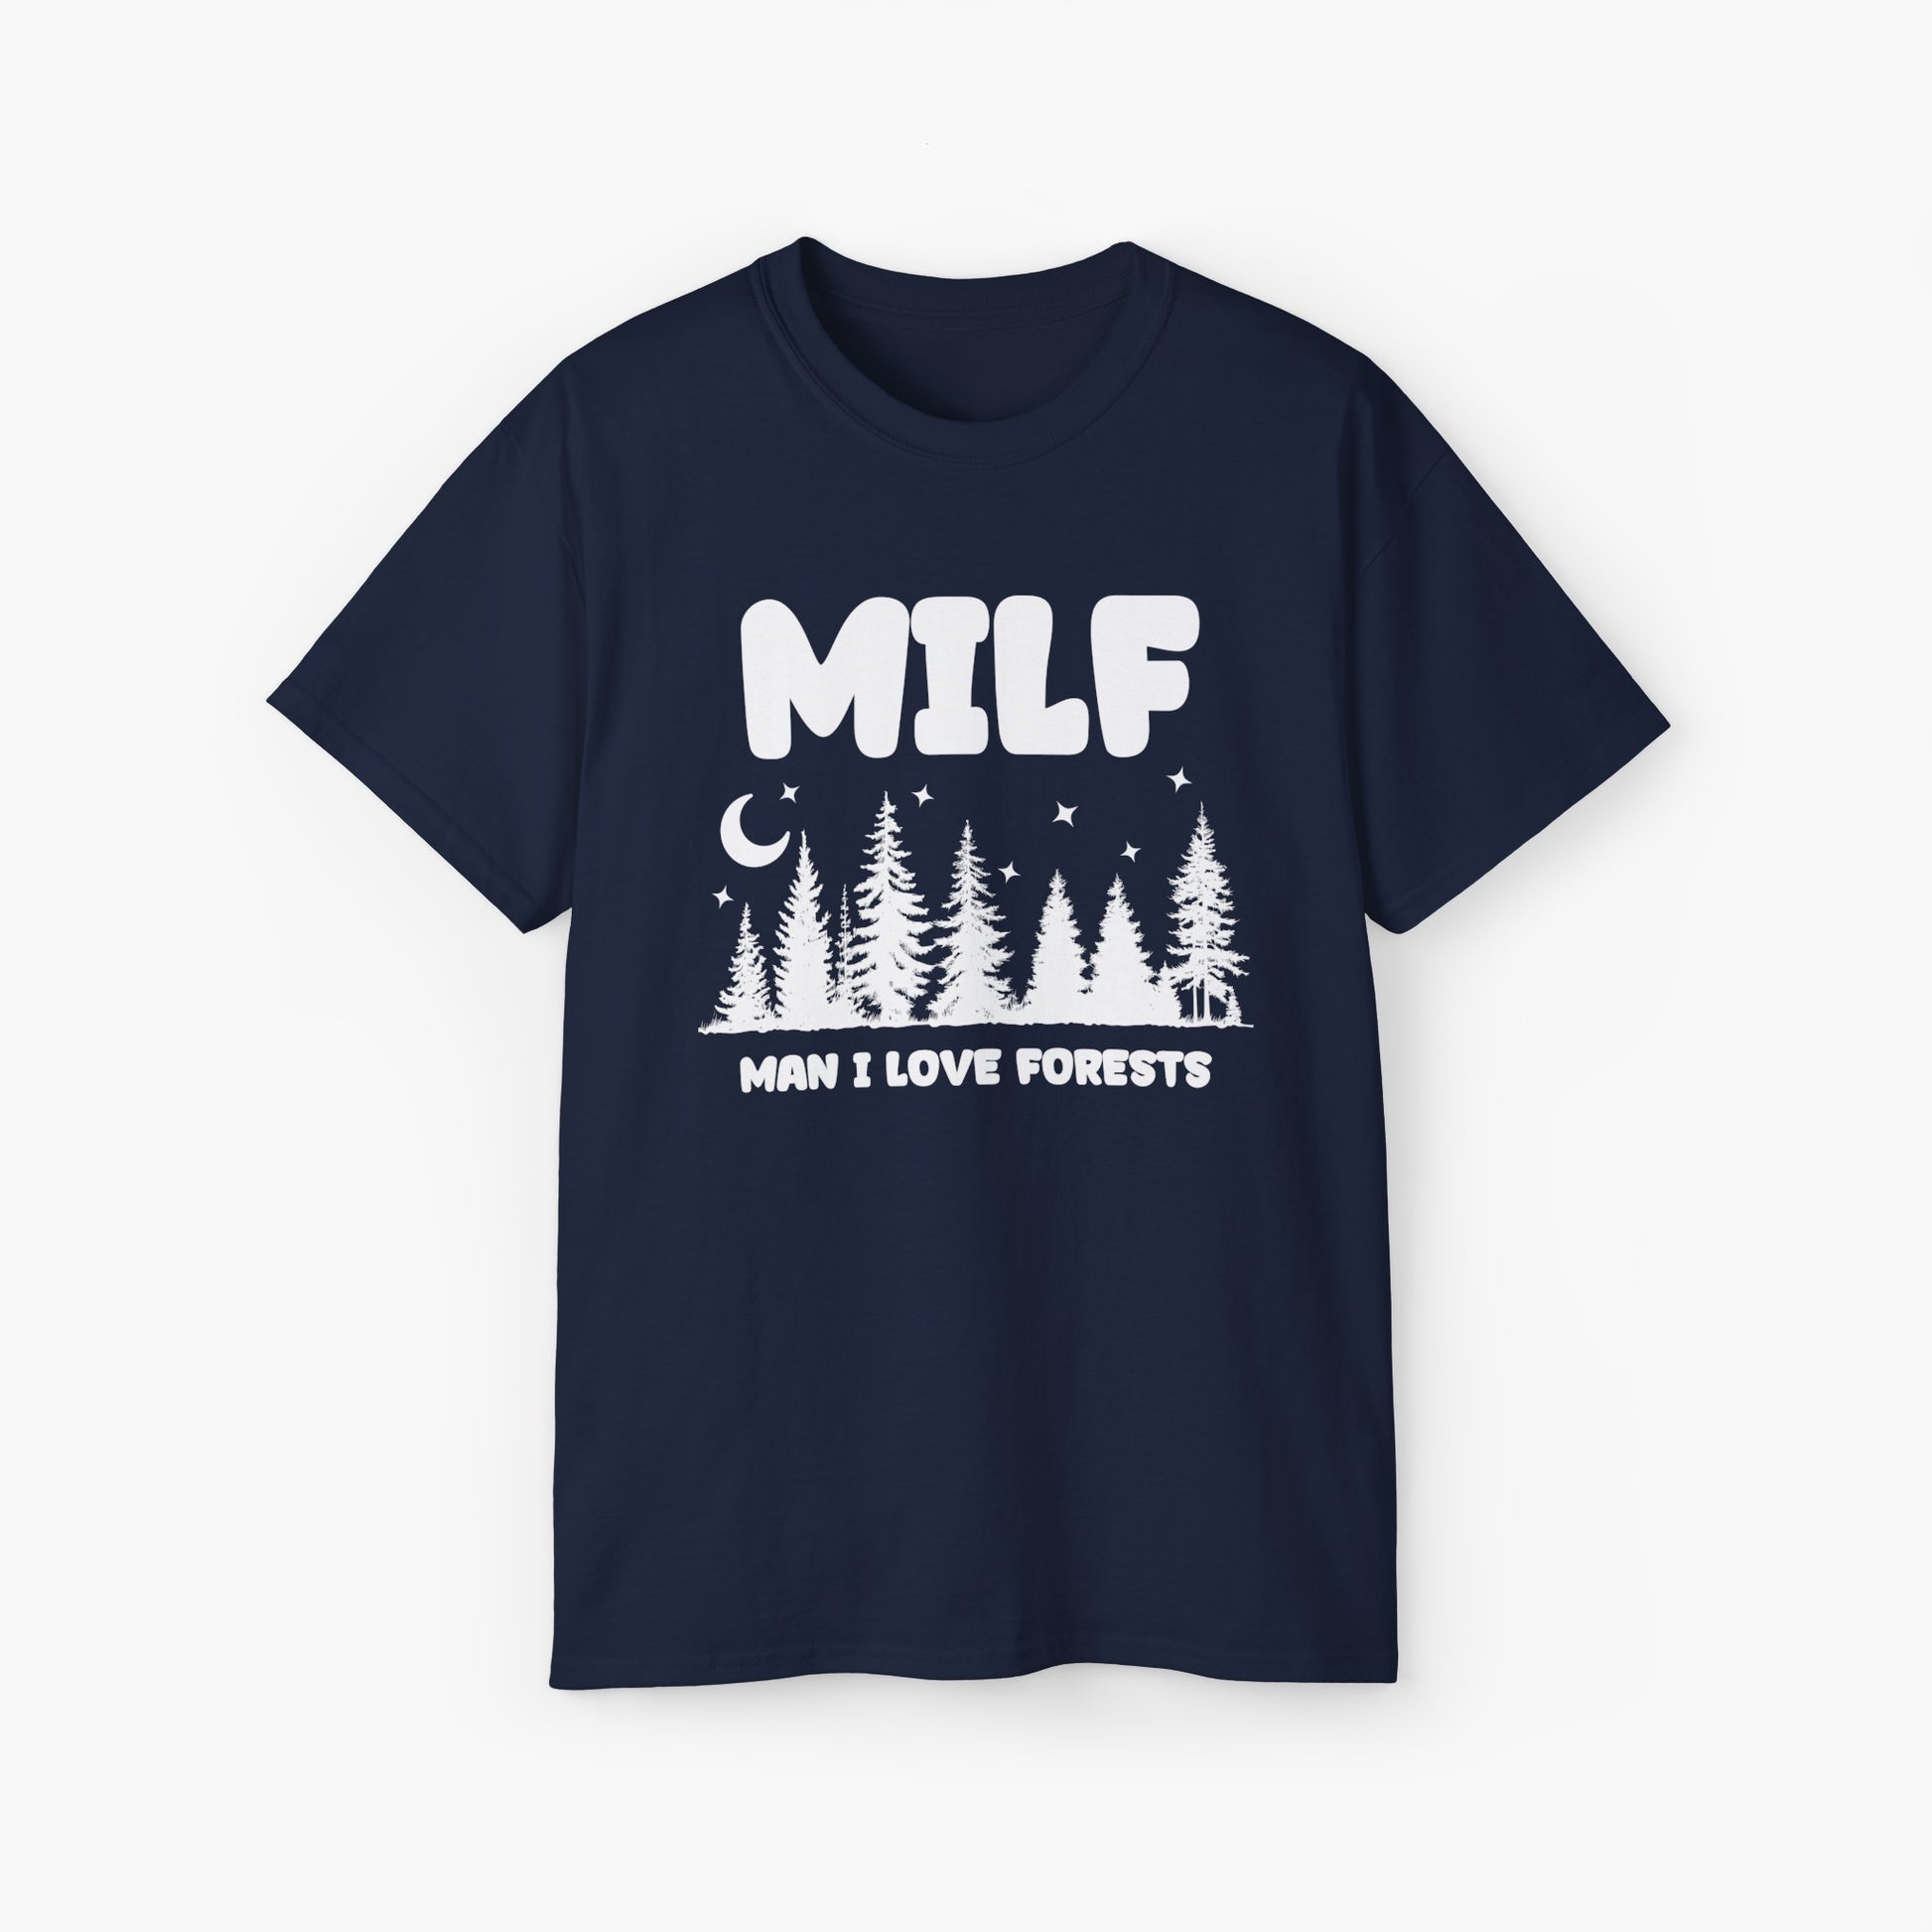 Dark blue t-shirt with the text 'MILF, Man I Love Forests,' featuring trees, stars, and a moon on a plain background.